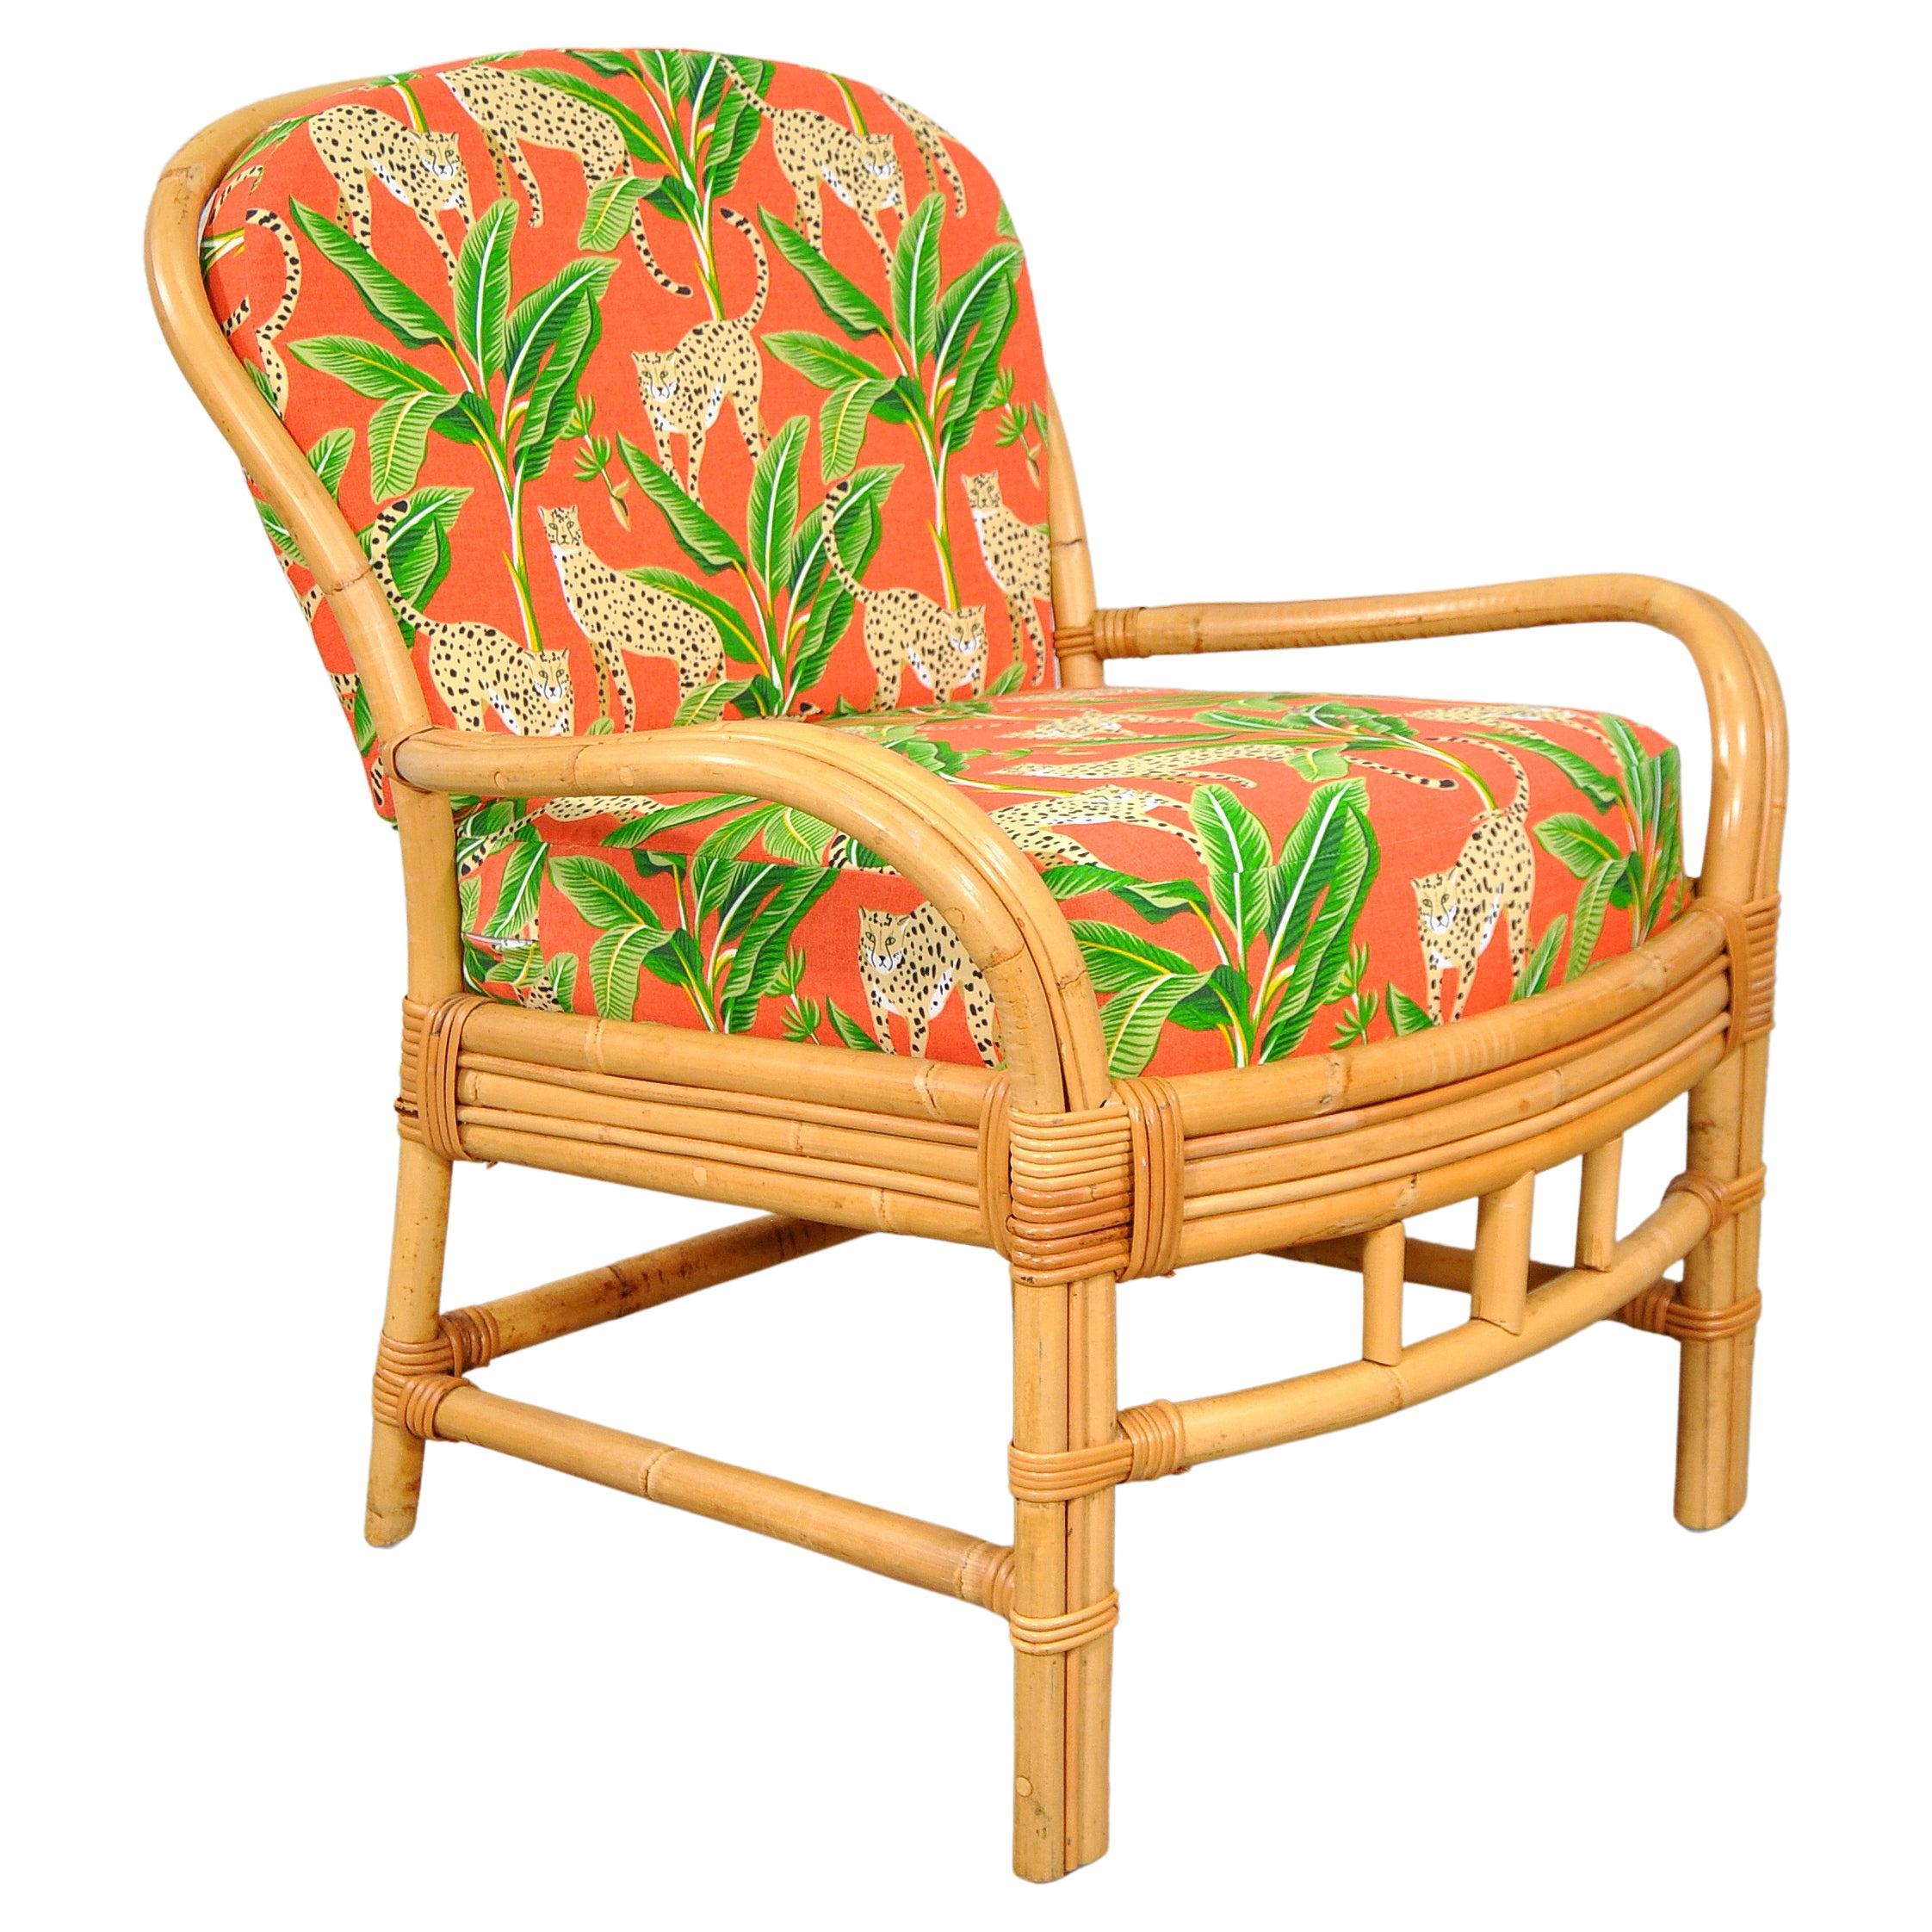 Rattan Chair with Tropical Cheetah and Palm Fabric